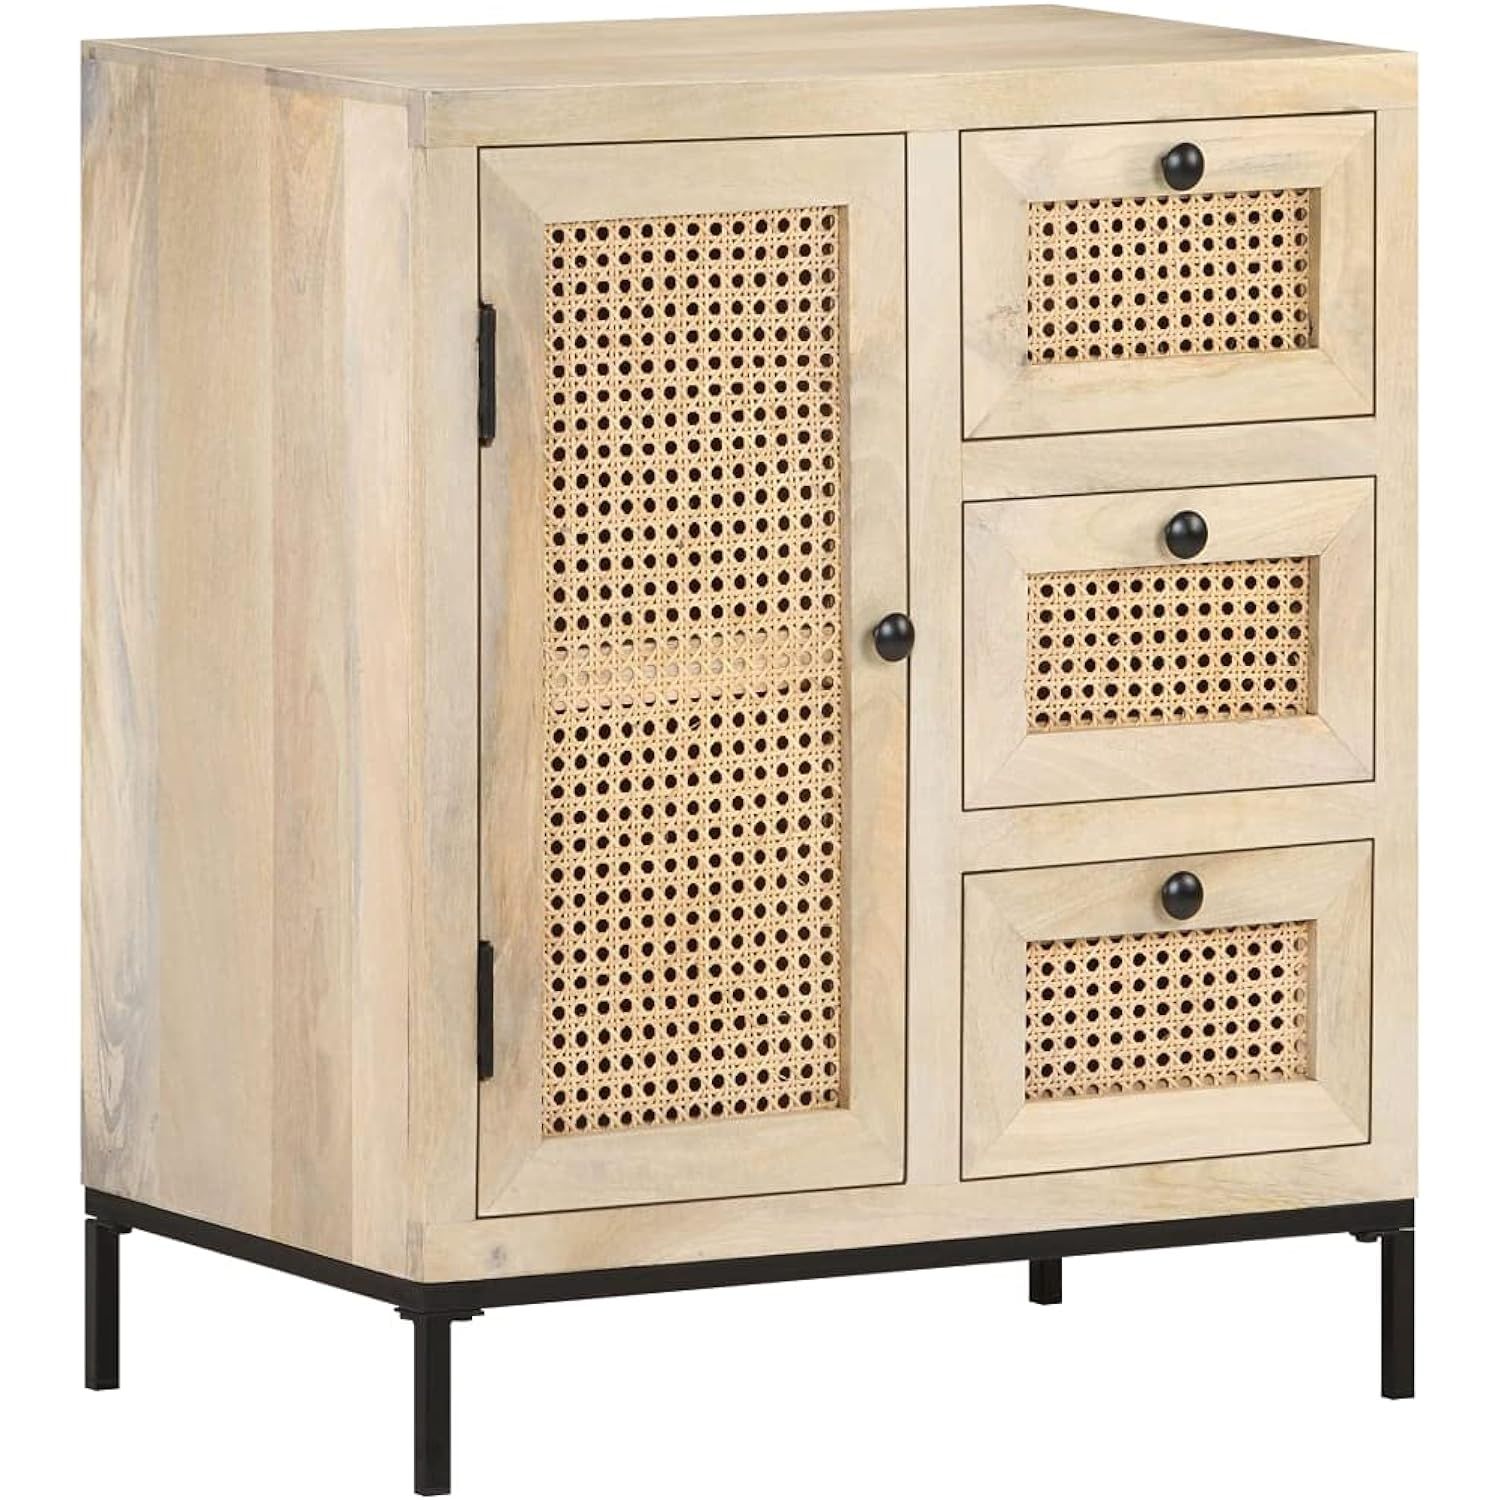 Buffet Sideboard Console Table, Buffet Cabinet, Wooden Storage Cabinet with 1 Door 3 Drawers in Cane | Amazon (US)